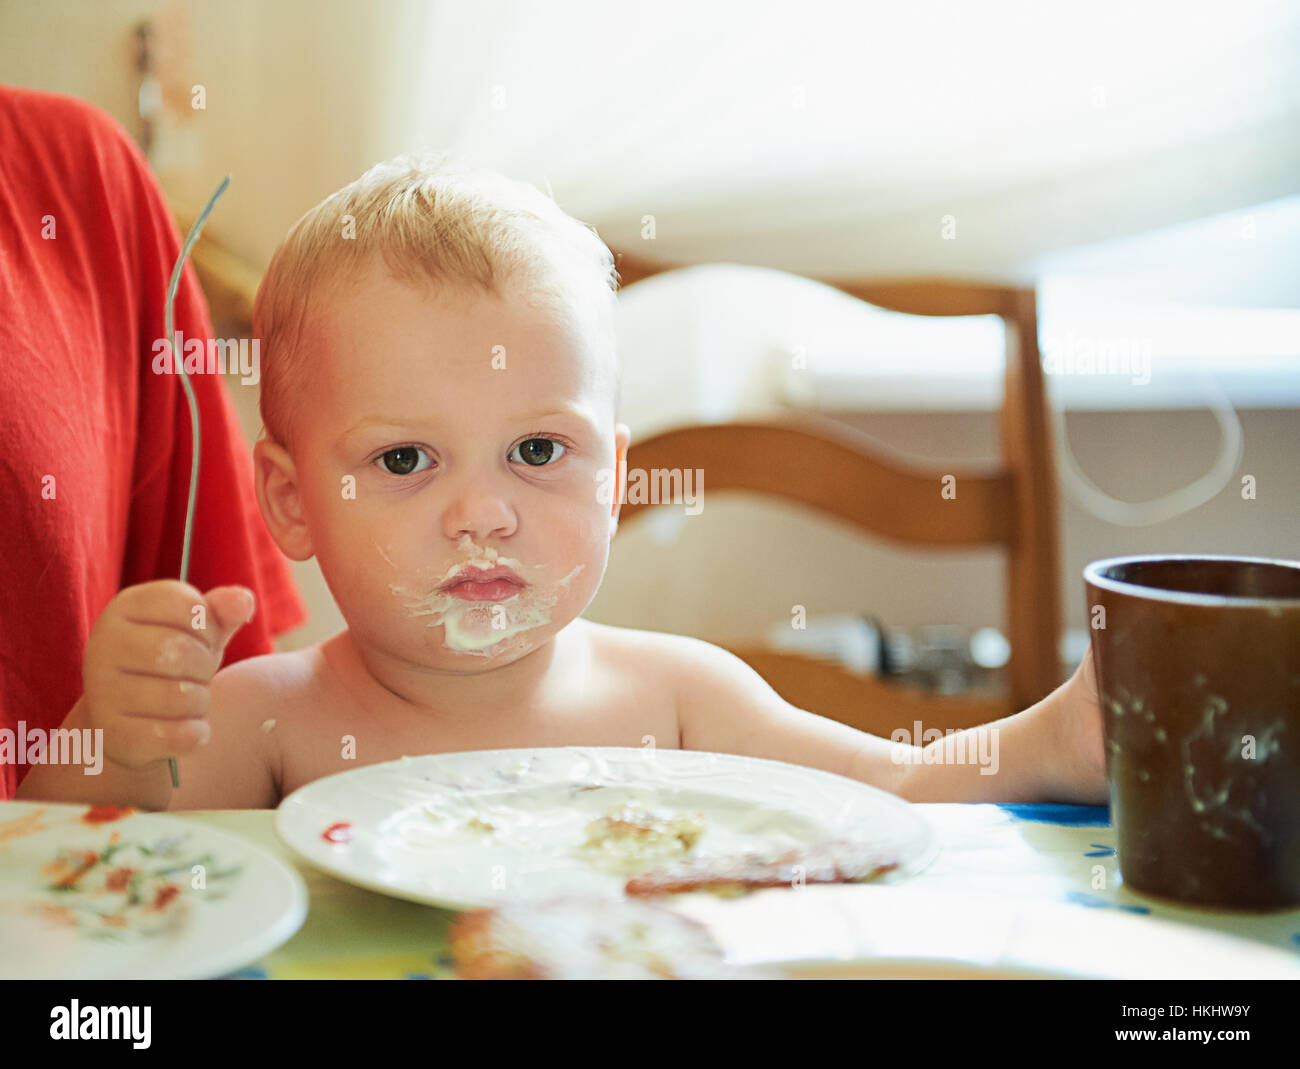 small boy eating with dirty mouth inside house Stock Photo